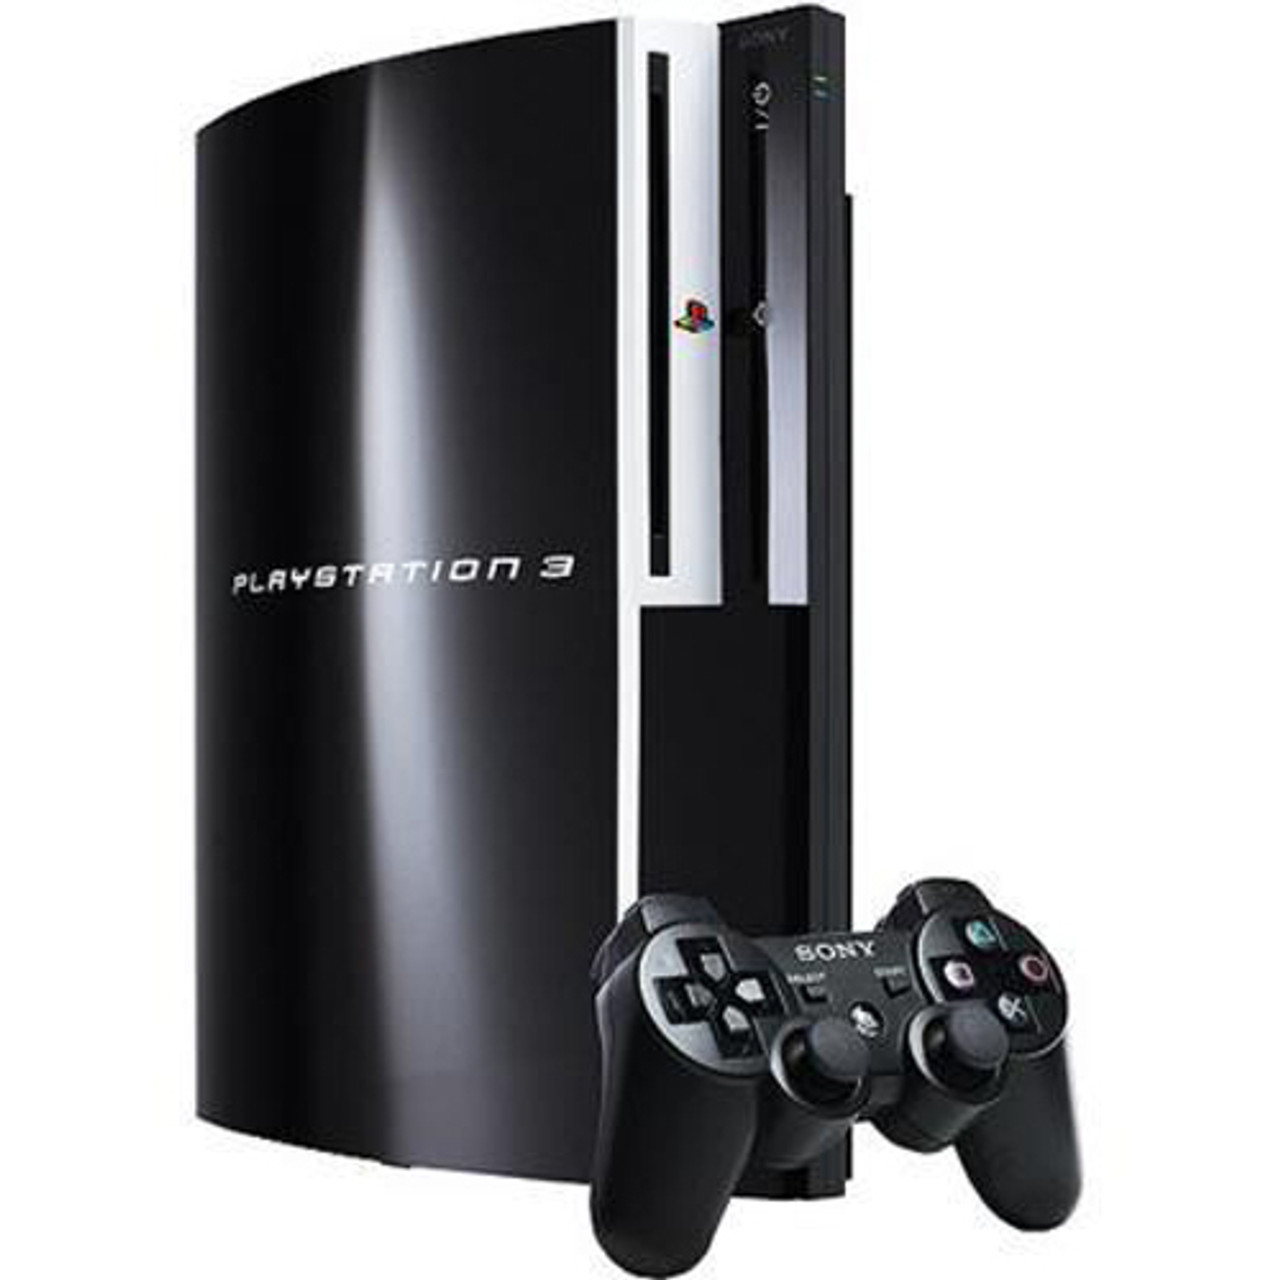 PS3 Reverse Compatible System For | DKOldies